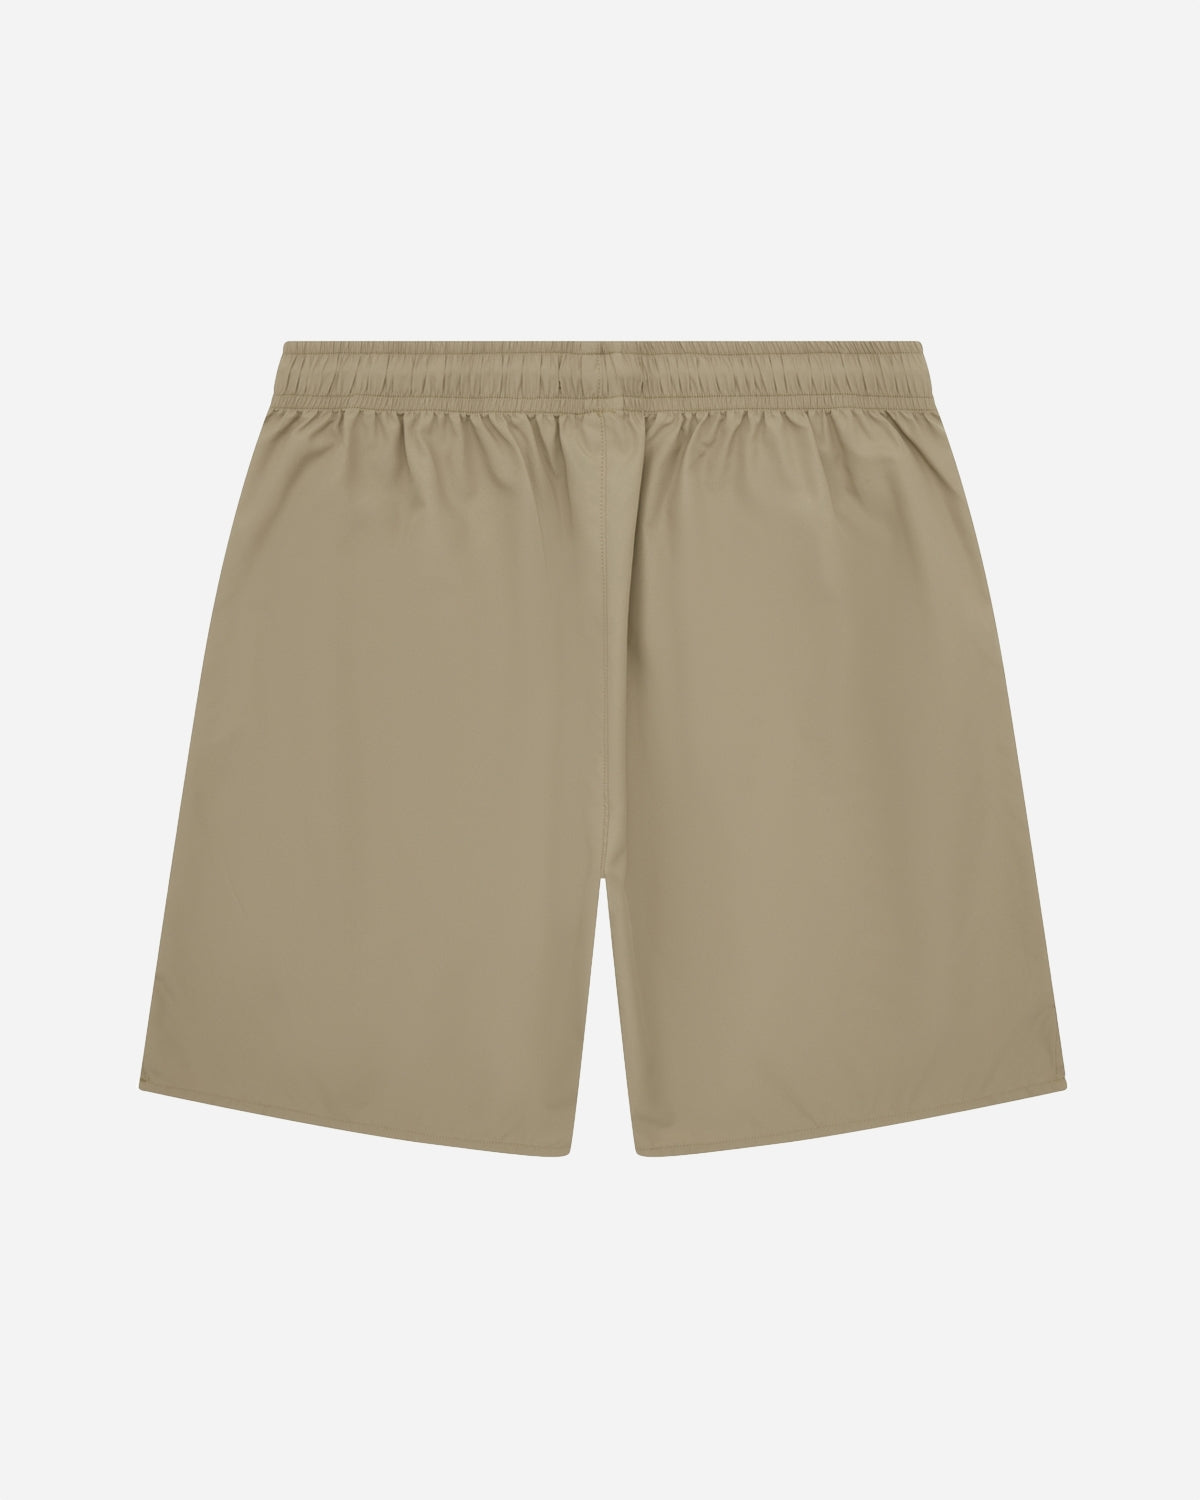 Haiden Tech Shorts - Taupe Brown